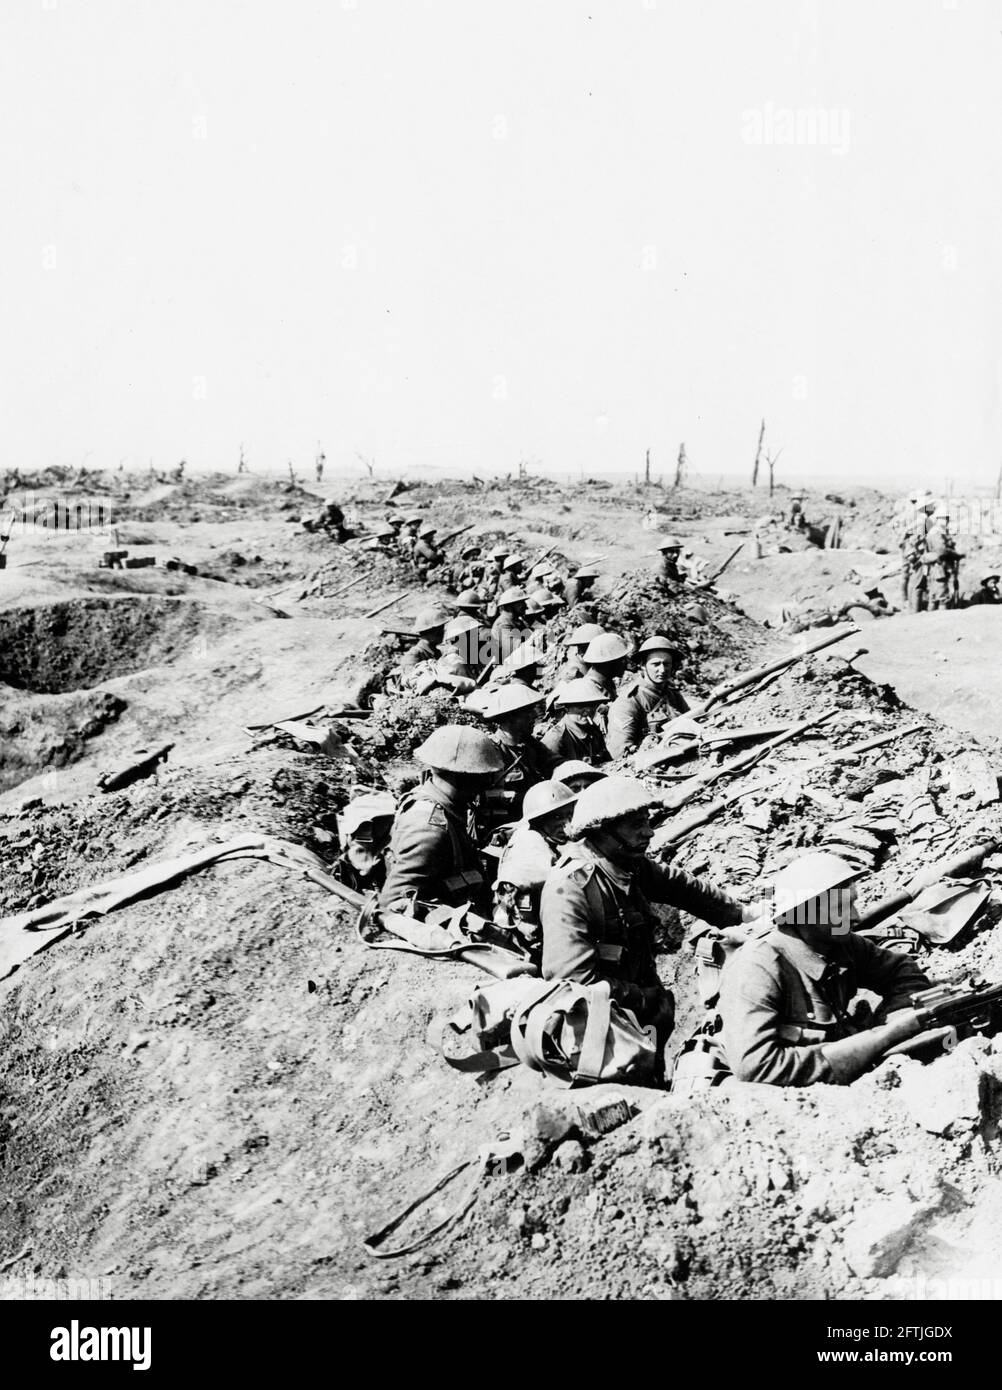 World War One, WWI, Western Front - Infantry in trenches waiting to advance, France Stock Photo